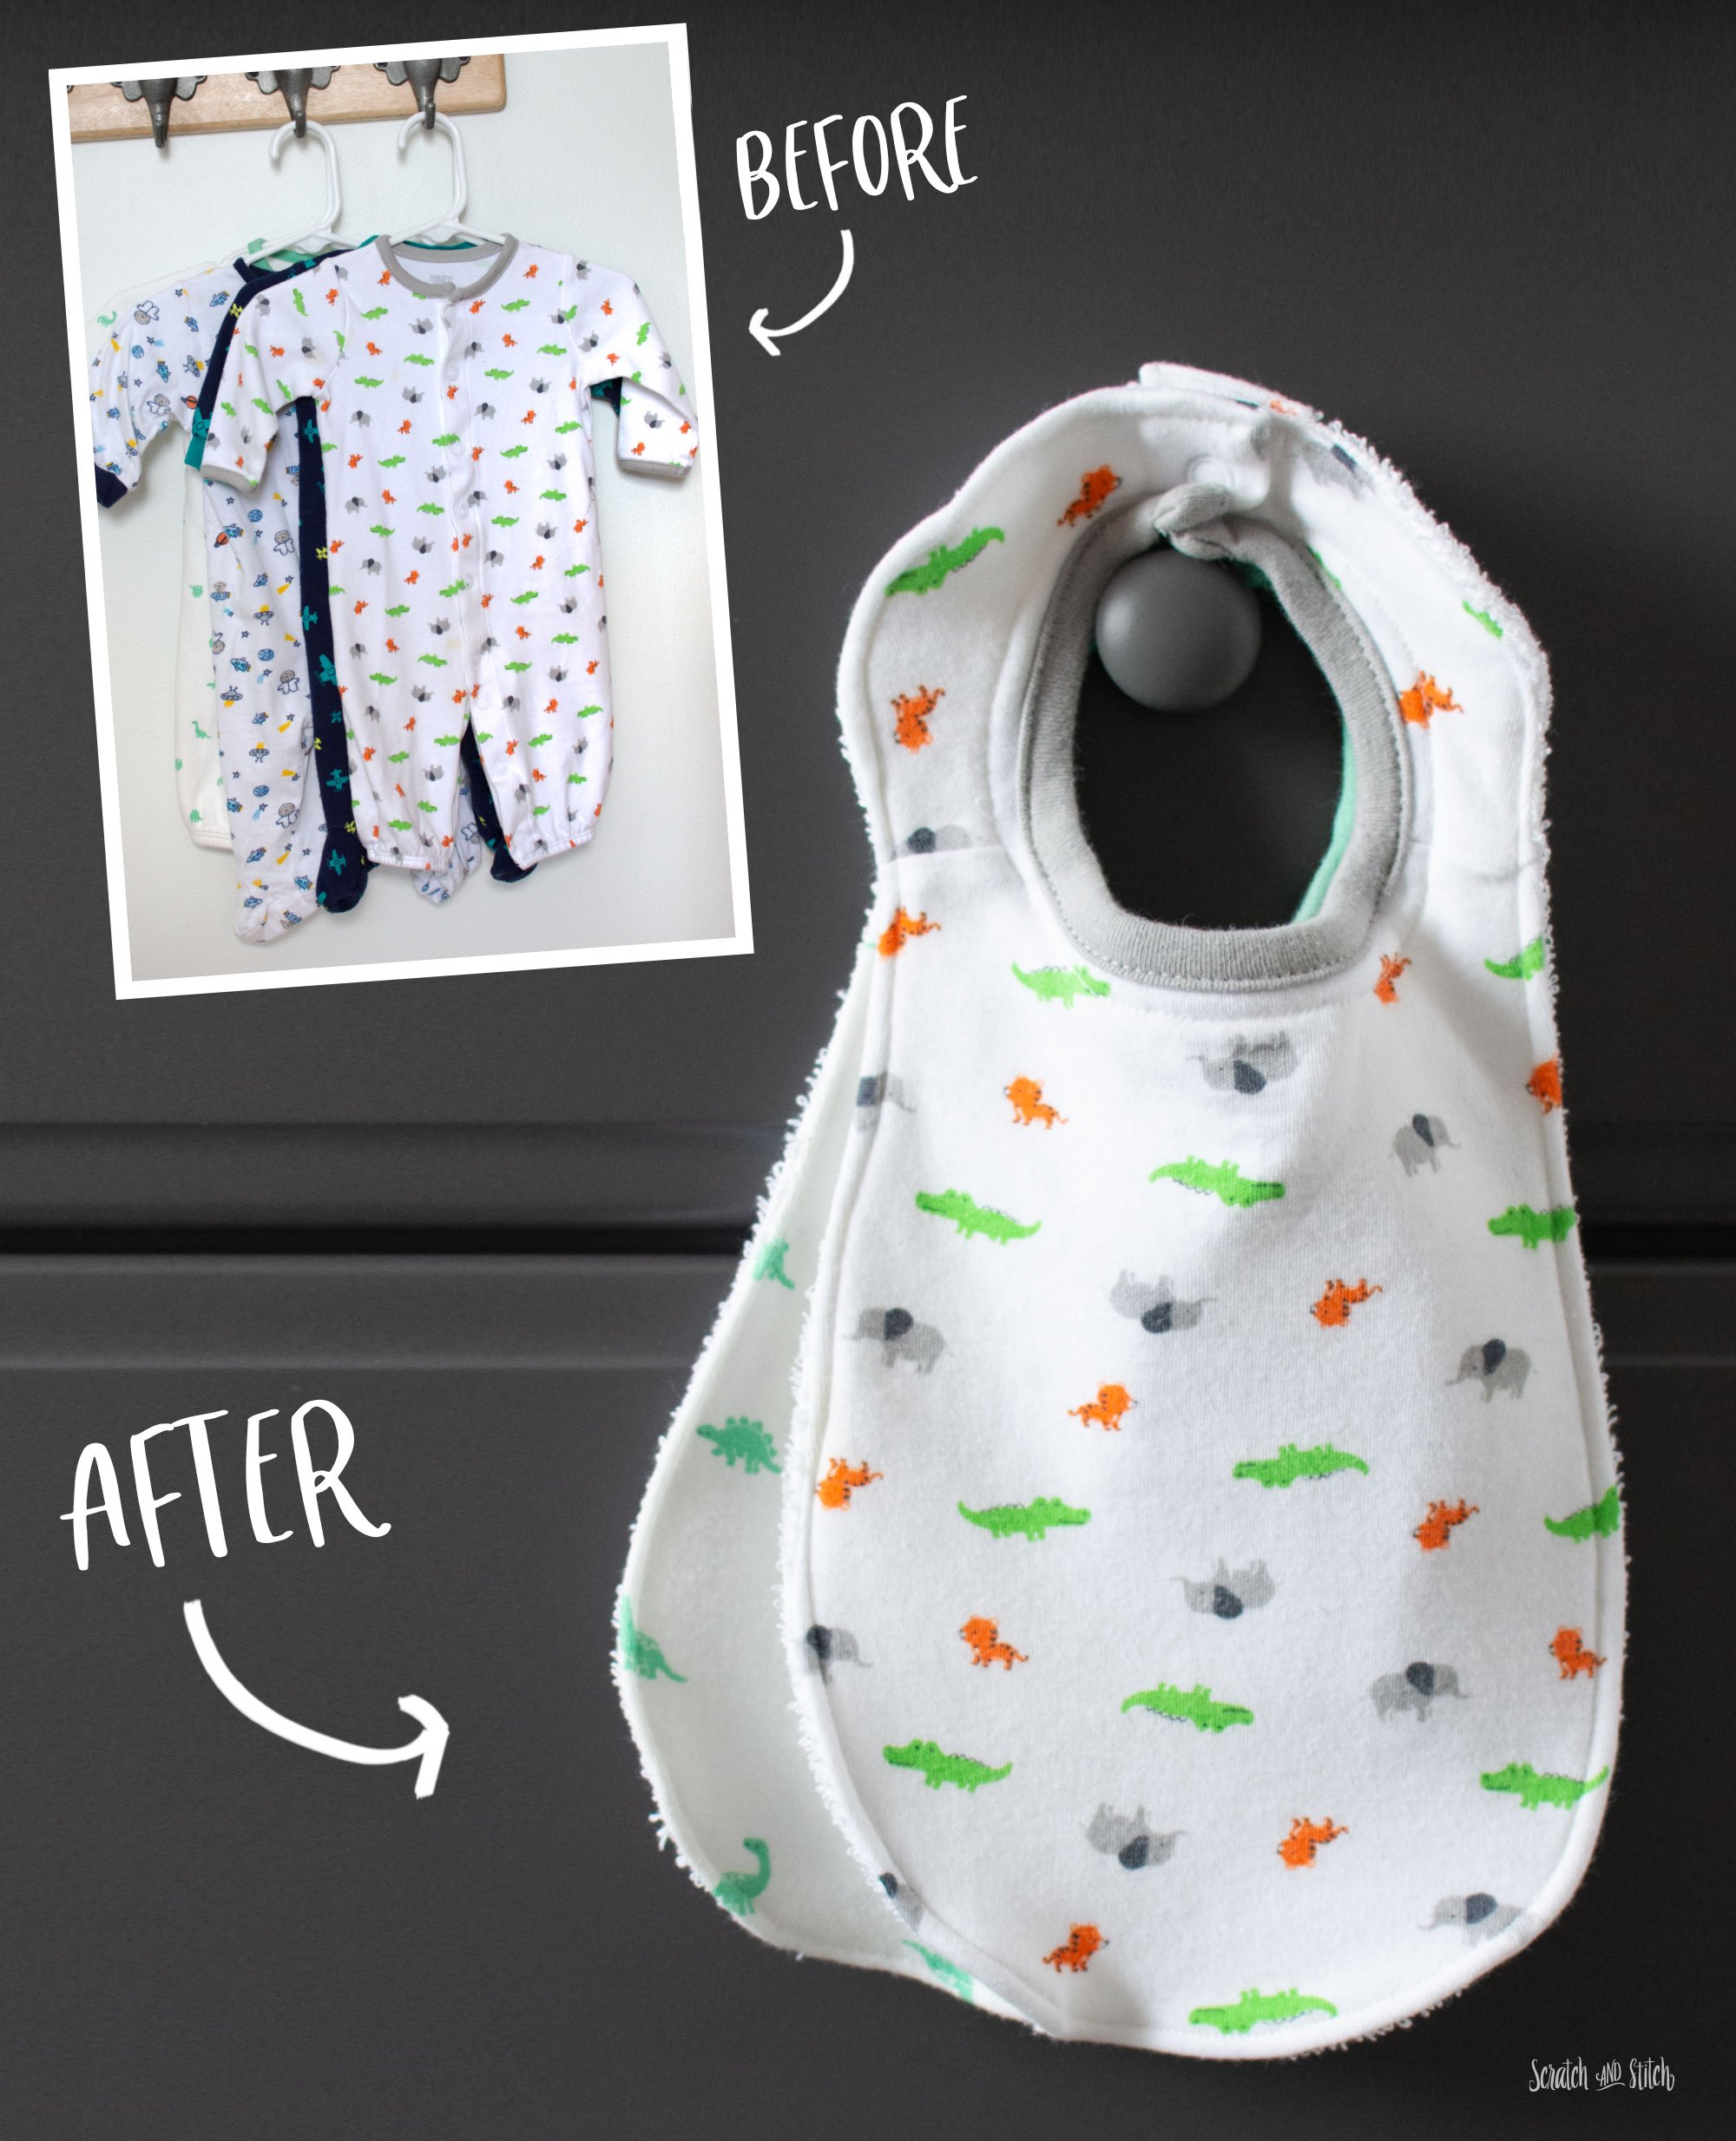 Upcycle Baby Clothes into Bibs - An 